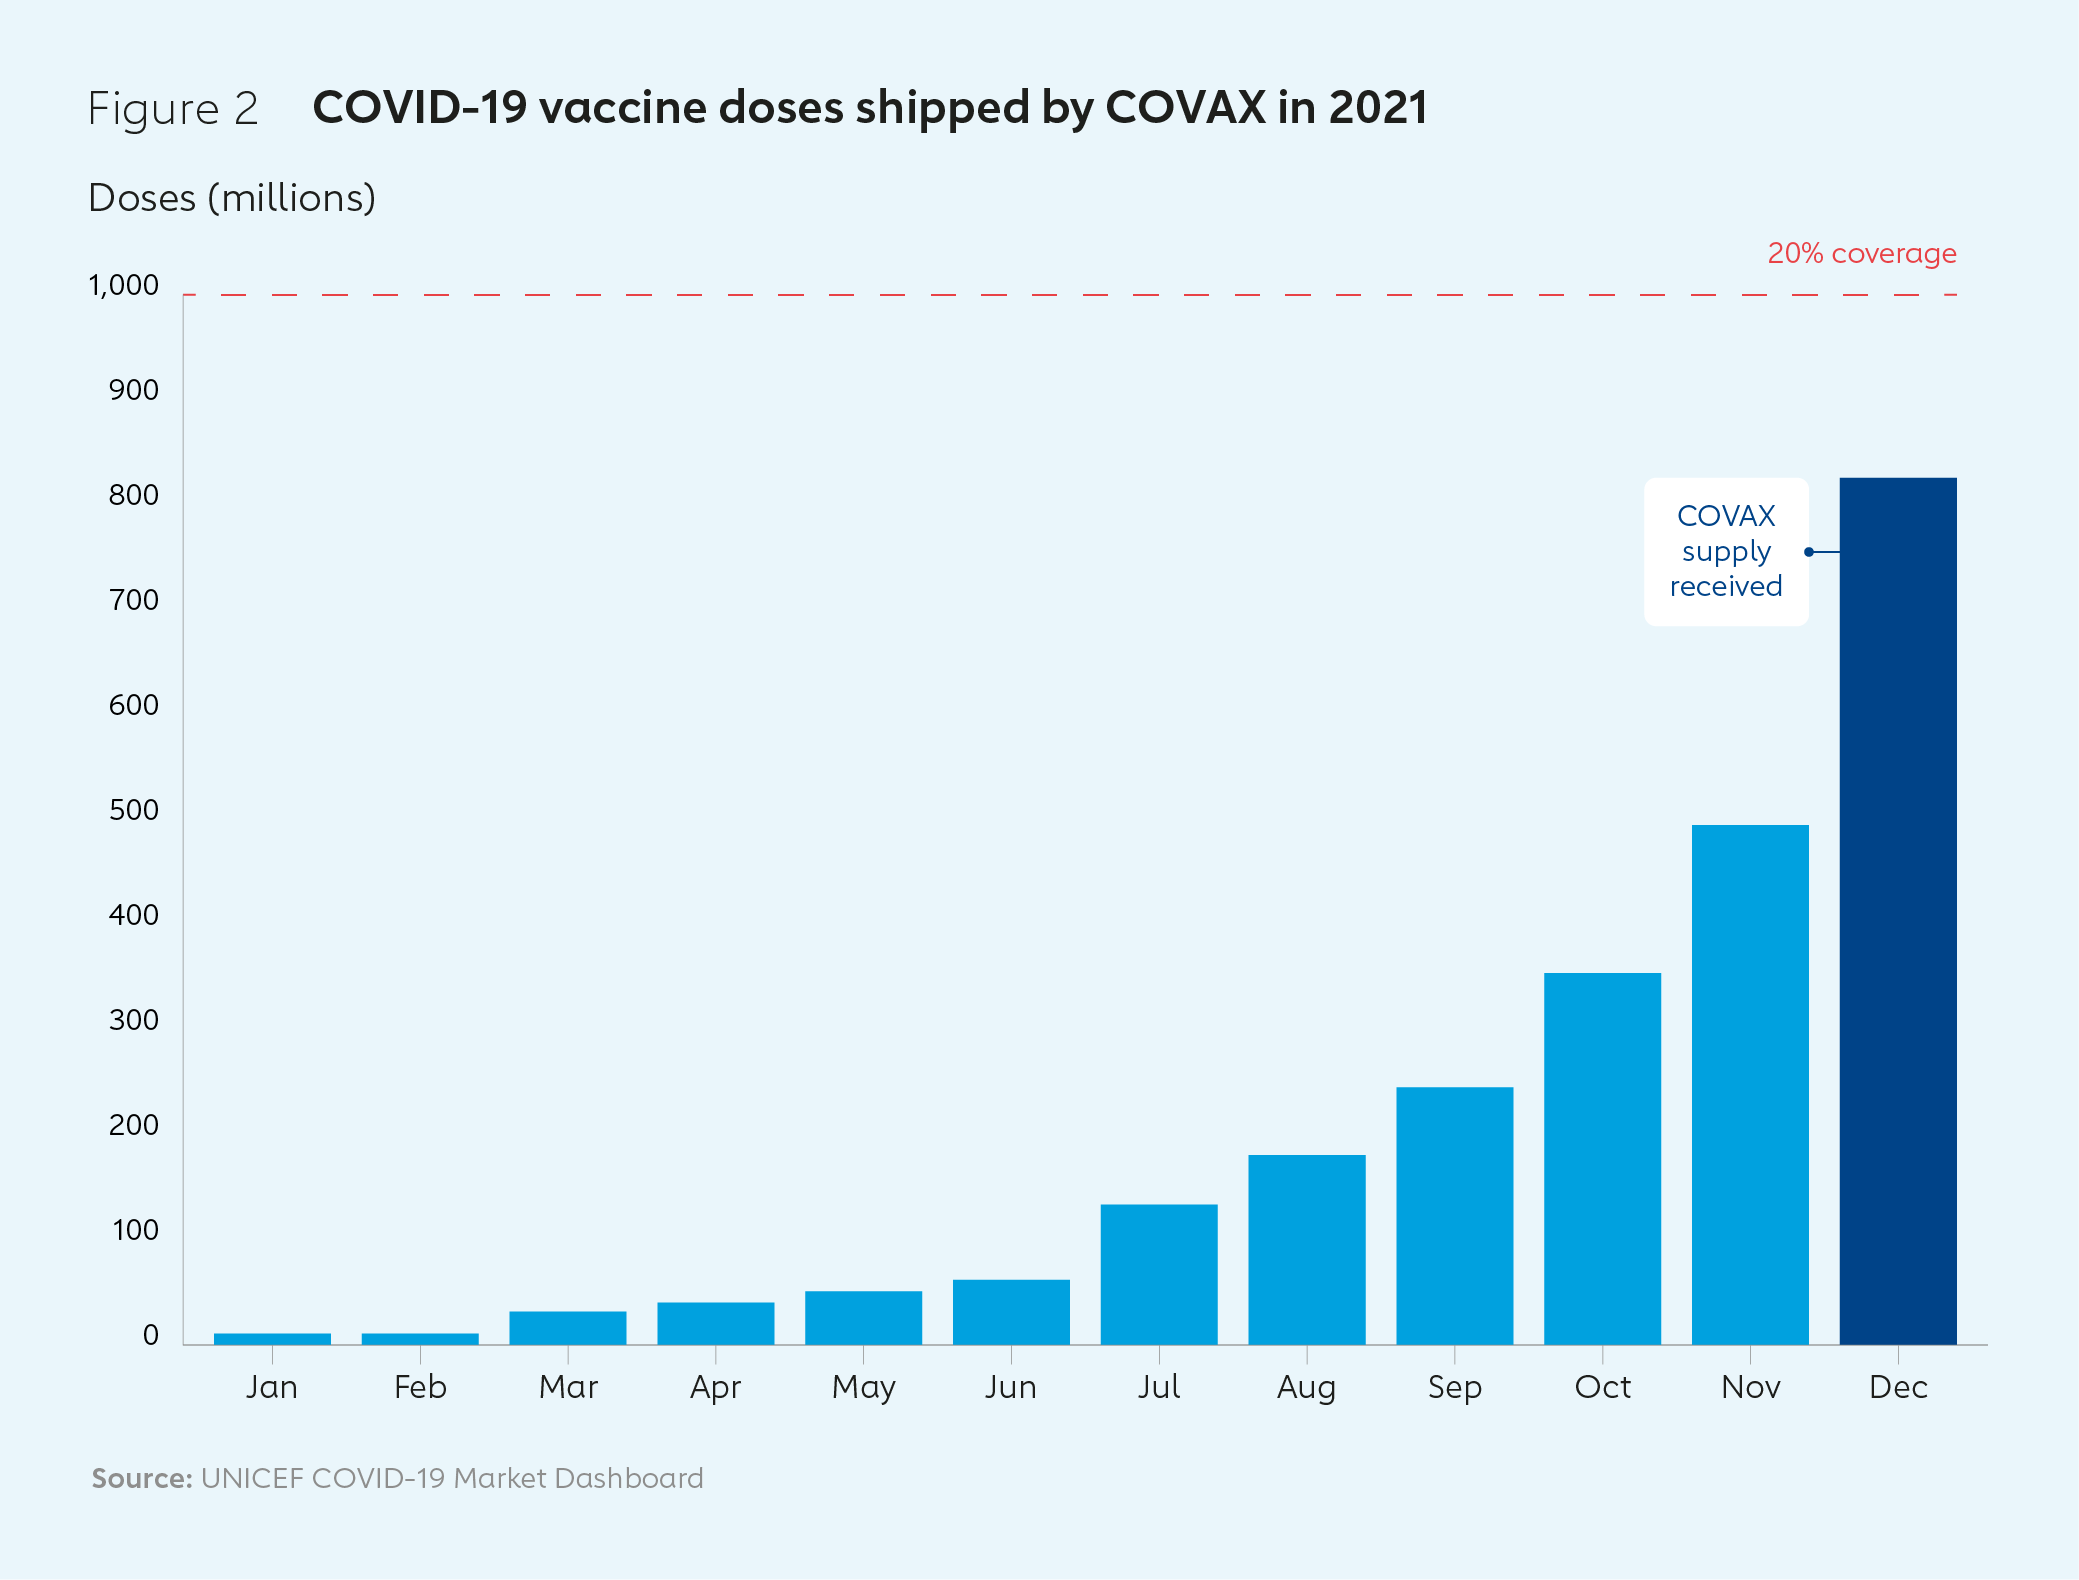 COVID-19 vaccine doses shipped by COVAX in 2021